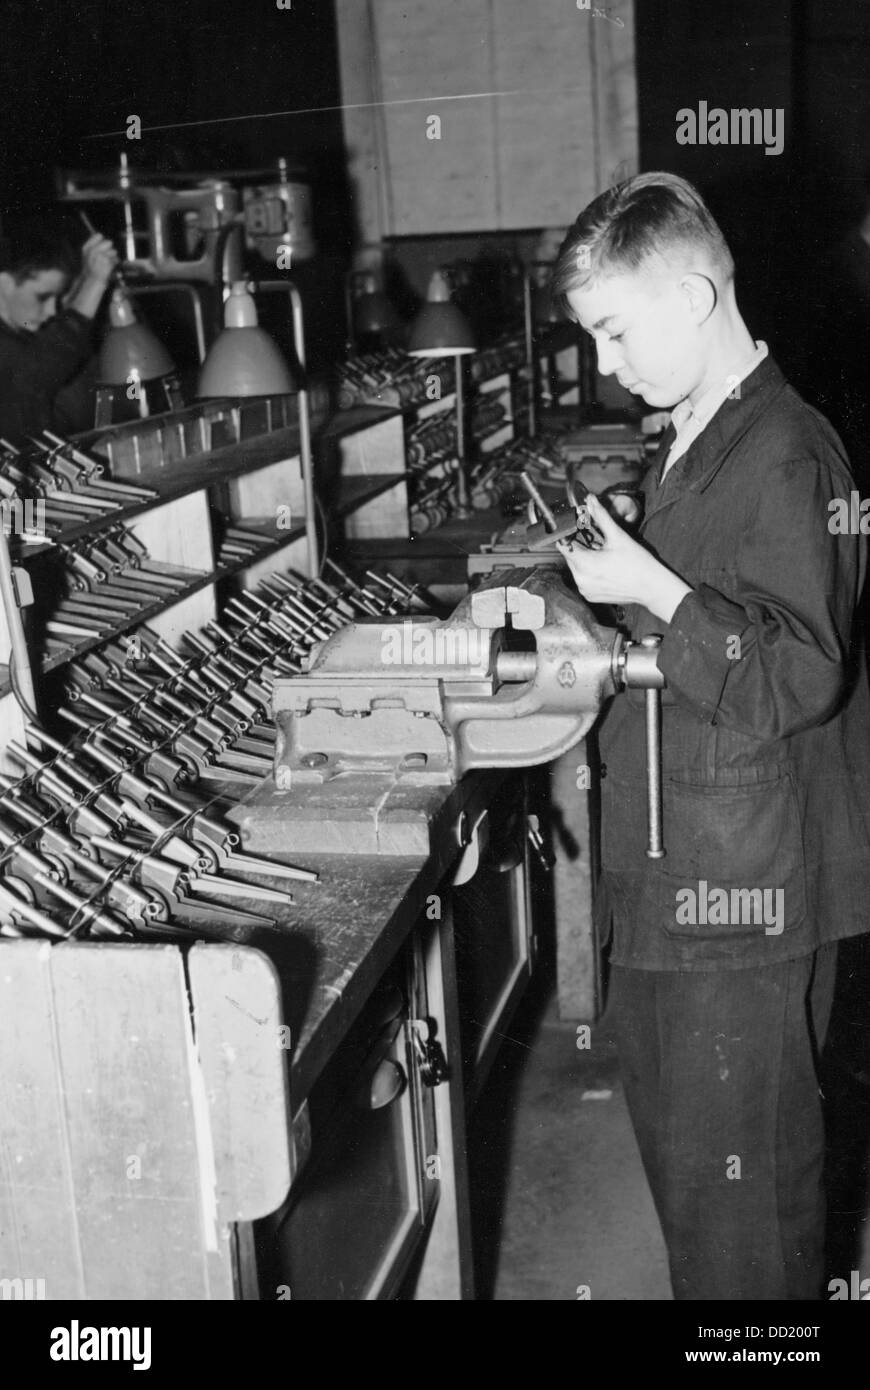 Members of the Hitler Youth produce toys for the children of soldiers in the context of the war service of the Hitler Youth in the workshop of Siemens & Halske AG in November 1942. The Nazi Propaganda! on the back of the image is dated 21 November 1942: 'Armament race of the Hitler Youth is part of the war service of the Hitler Youth, in which the youth organization with millions of members including the ones of the Country Service, Eastern Service and Kinderlandverschickung (KLV - Evacuation of Children Service) produce toys for the children of soldiers and closes gaps, which were created by  Stock Photo